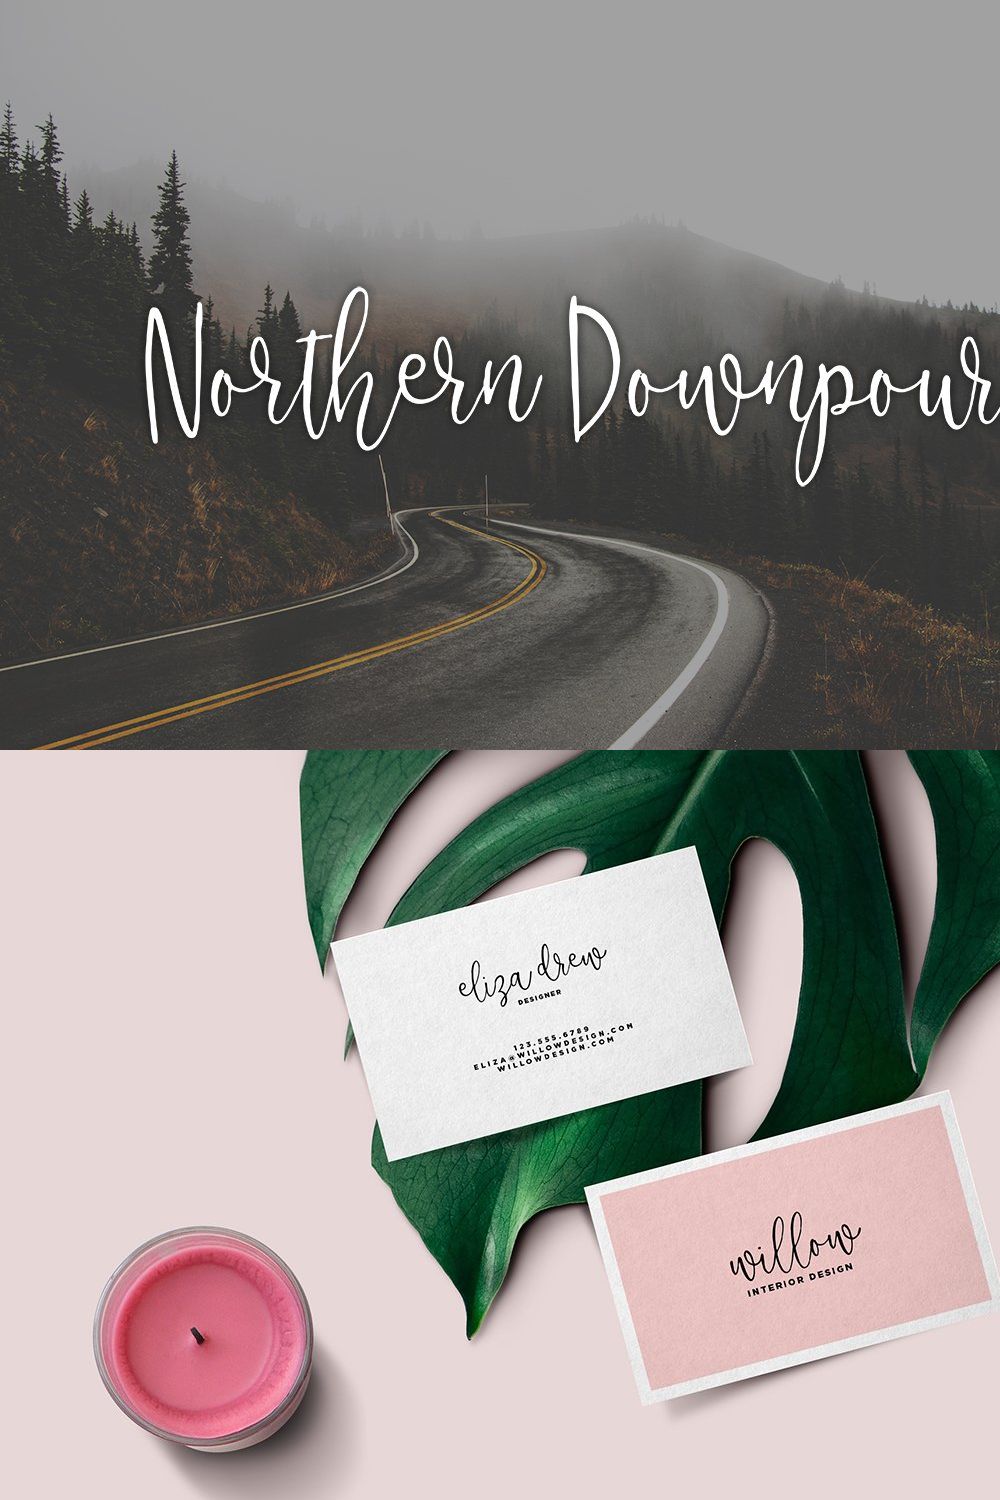 Northern Downpour pinterest preview image.